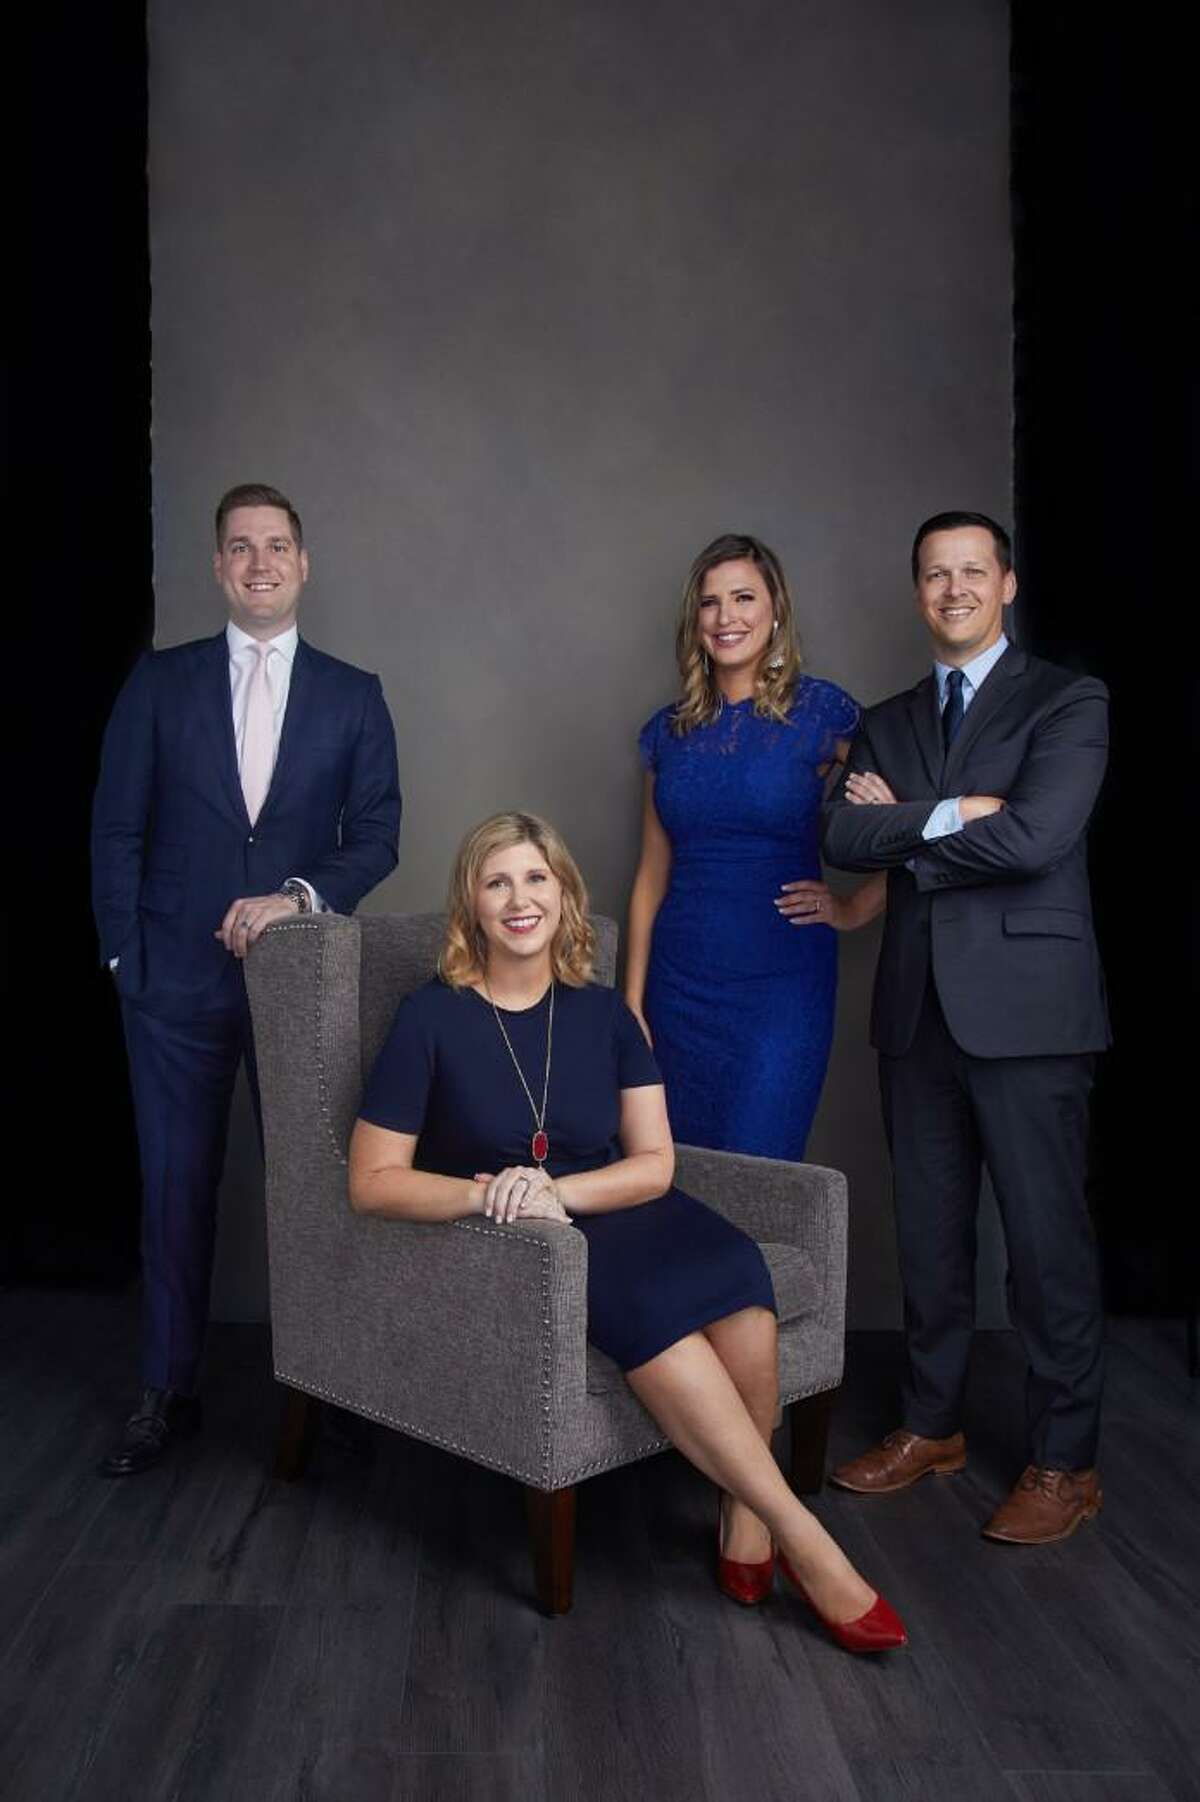 Partnership Lake Houston has announced their four under 40 business leaders for the community and will be honoring them with a luncheon on July 20.